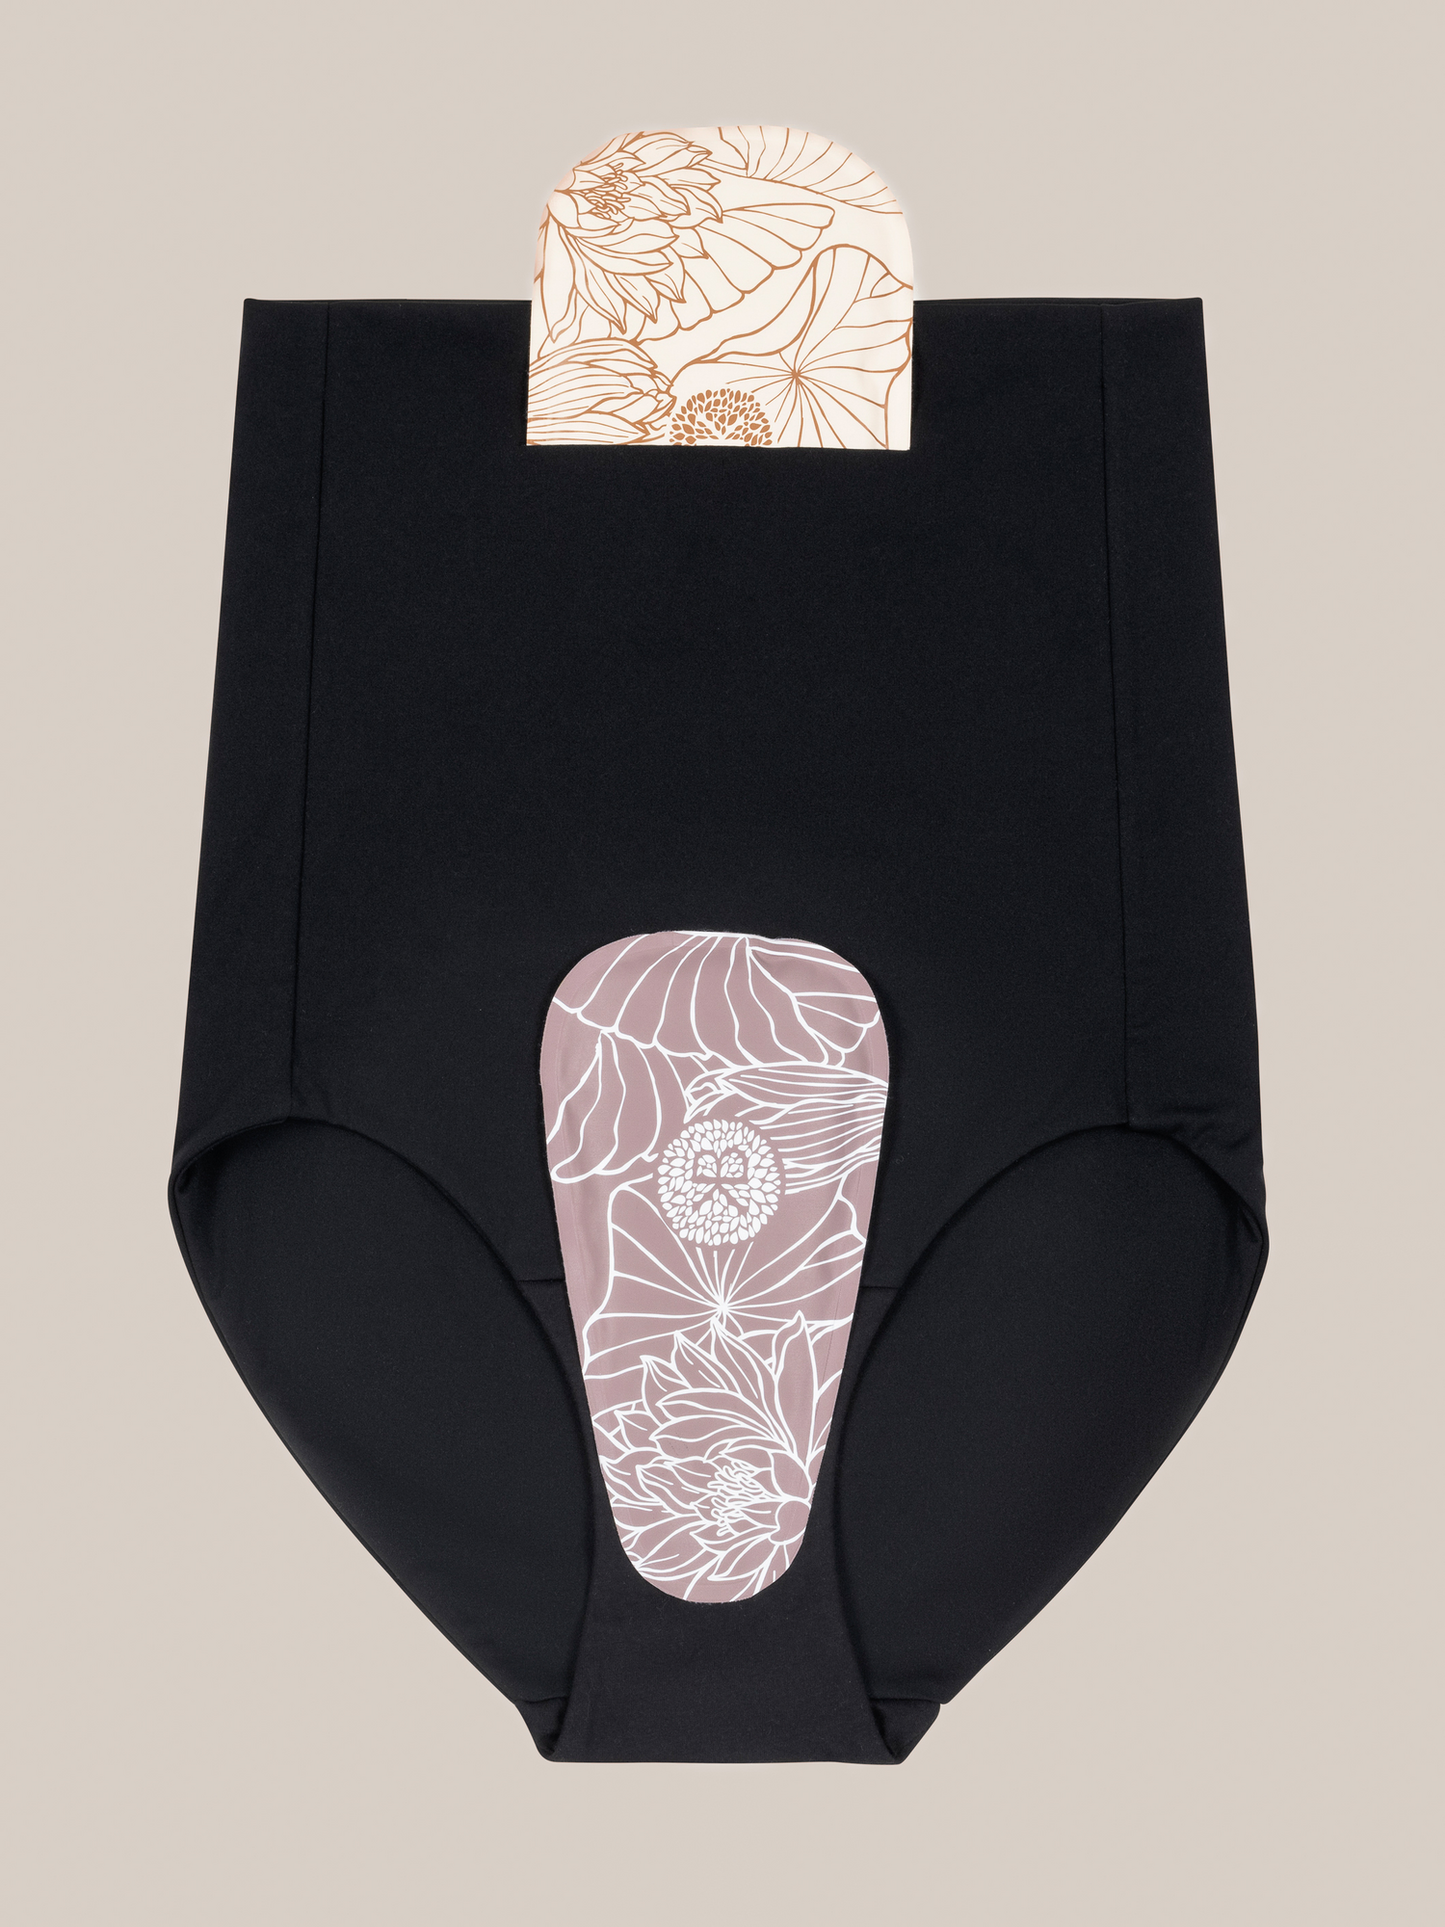 Product image of the Soothing Fourth Trimester Underwear in Black showing the two removable gel packs. 